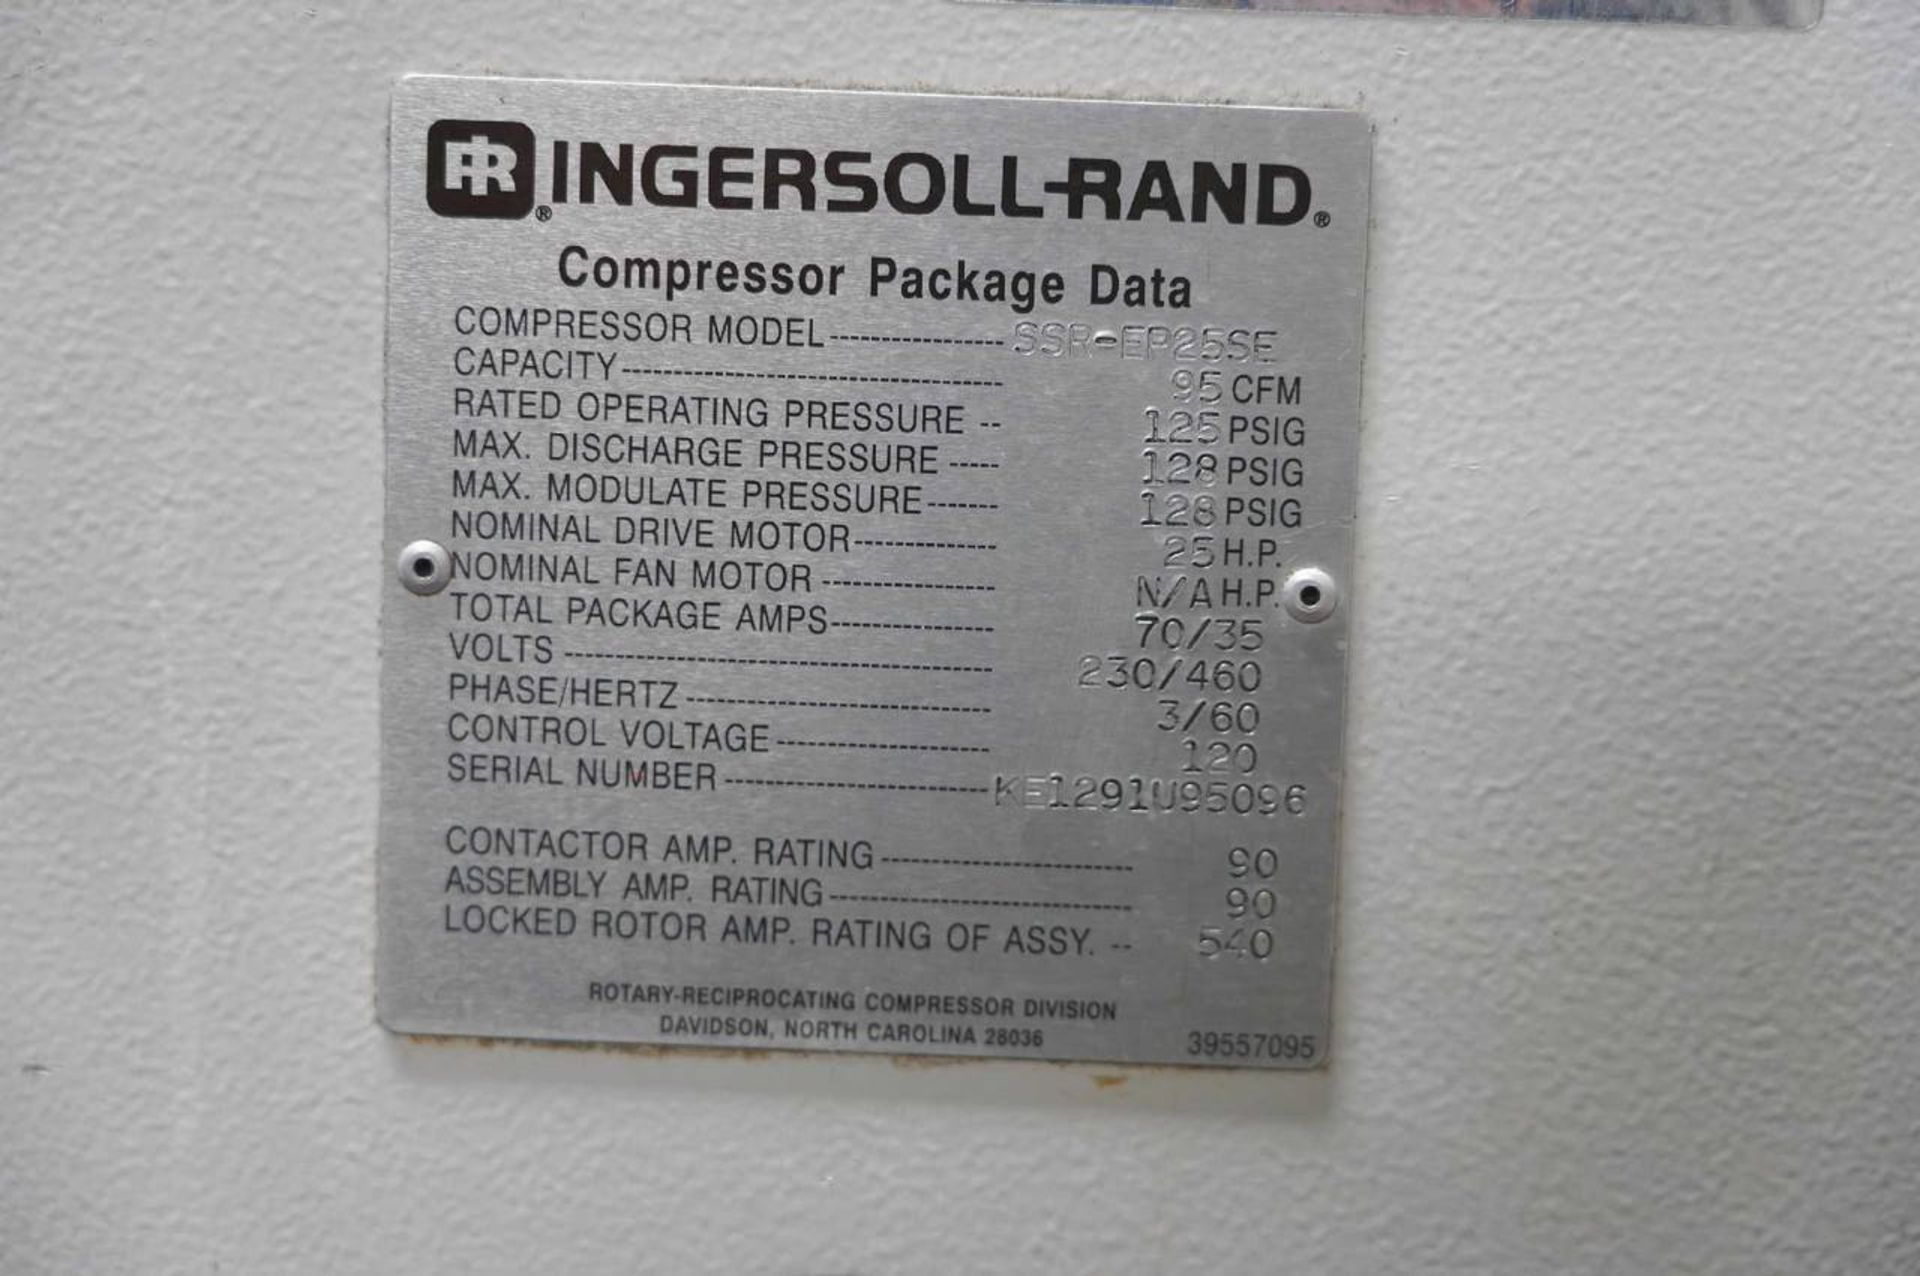 Ingersol Rand SSR-EP25SE Rotary Screw Type Air Compressor - Image 5 of 5